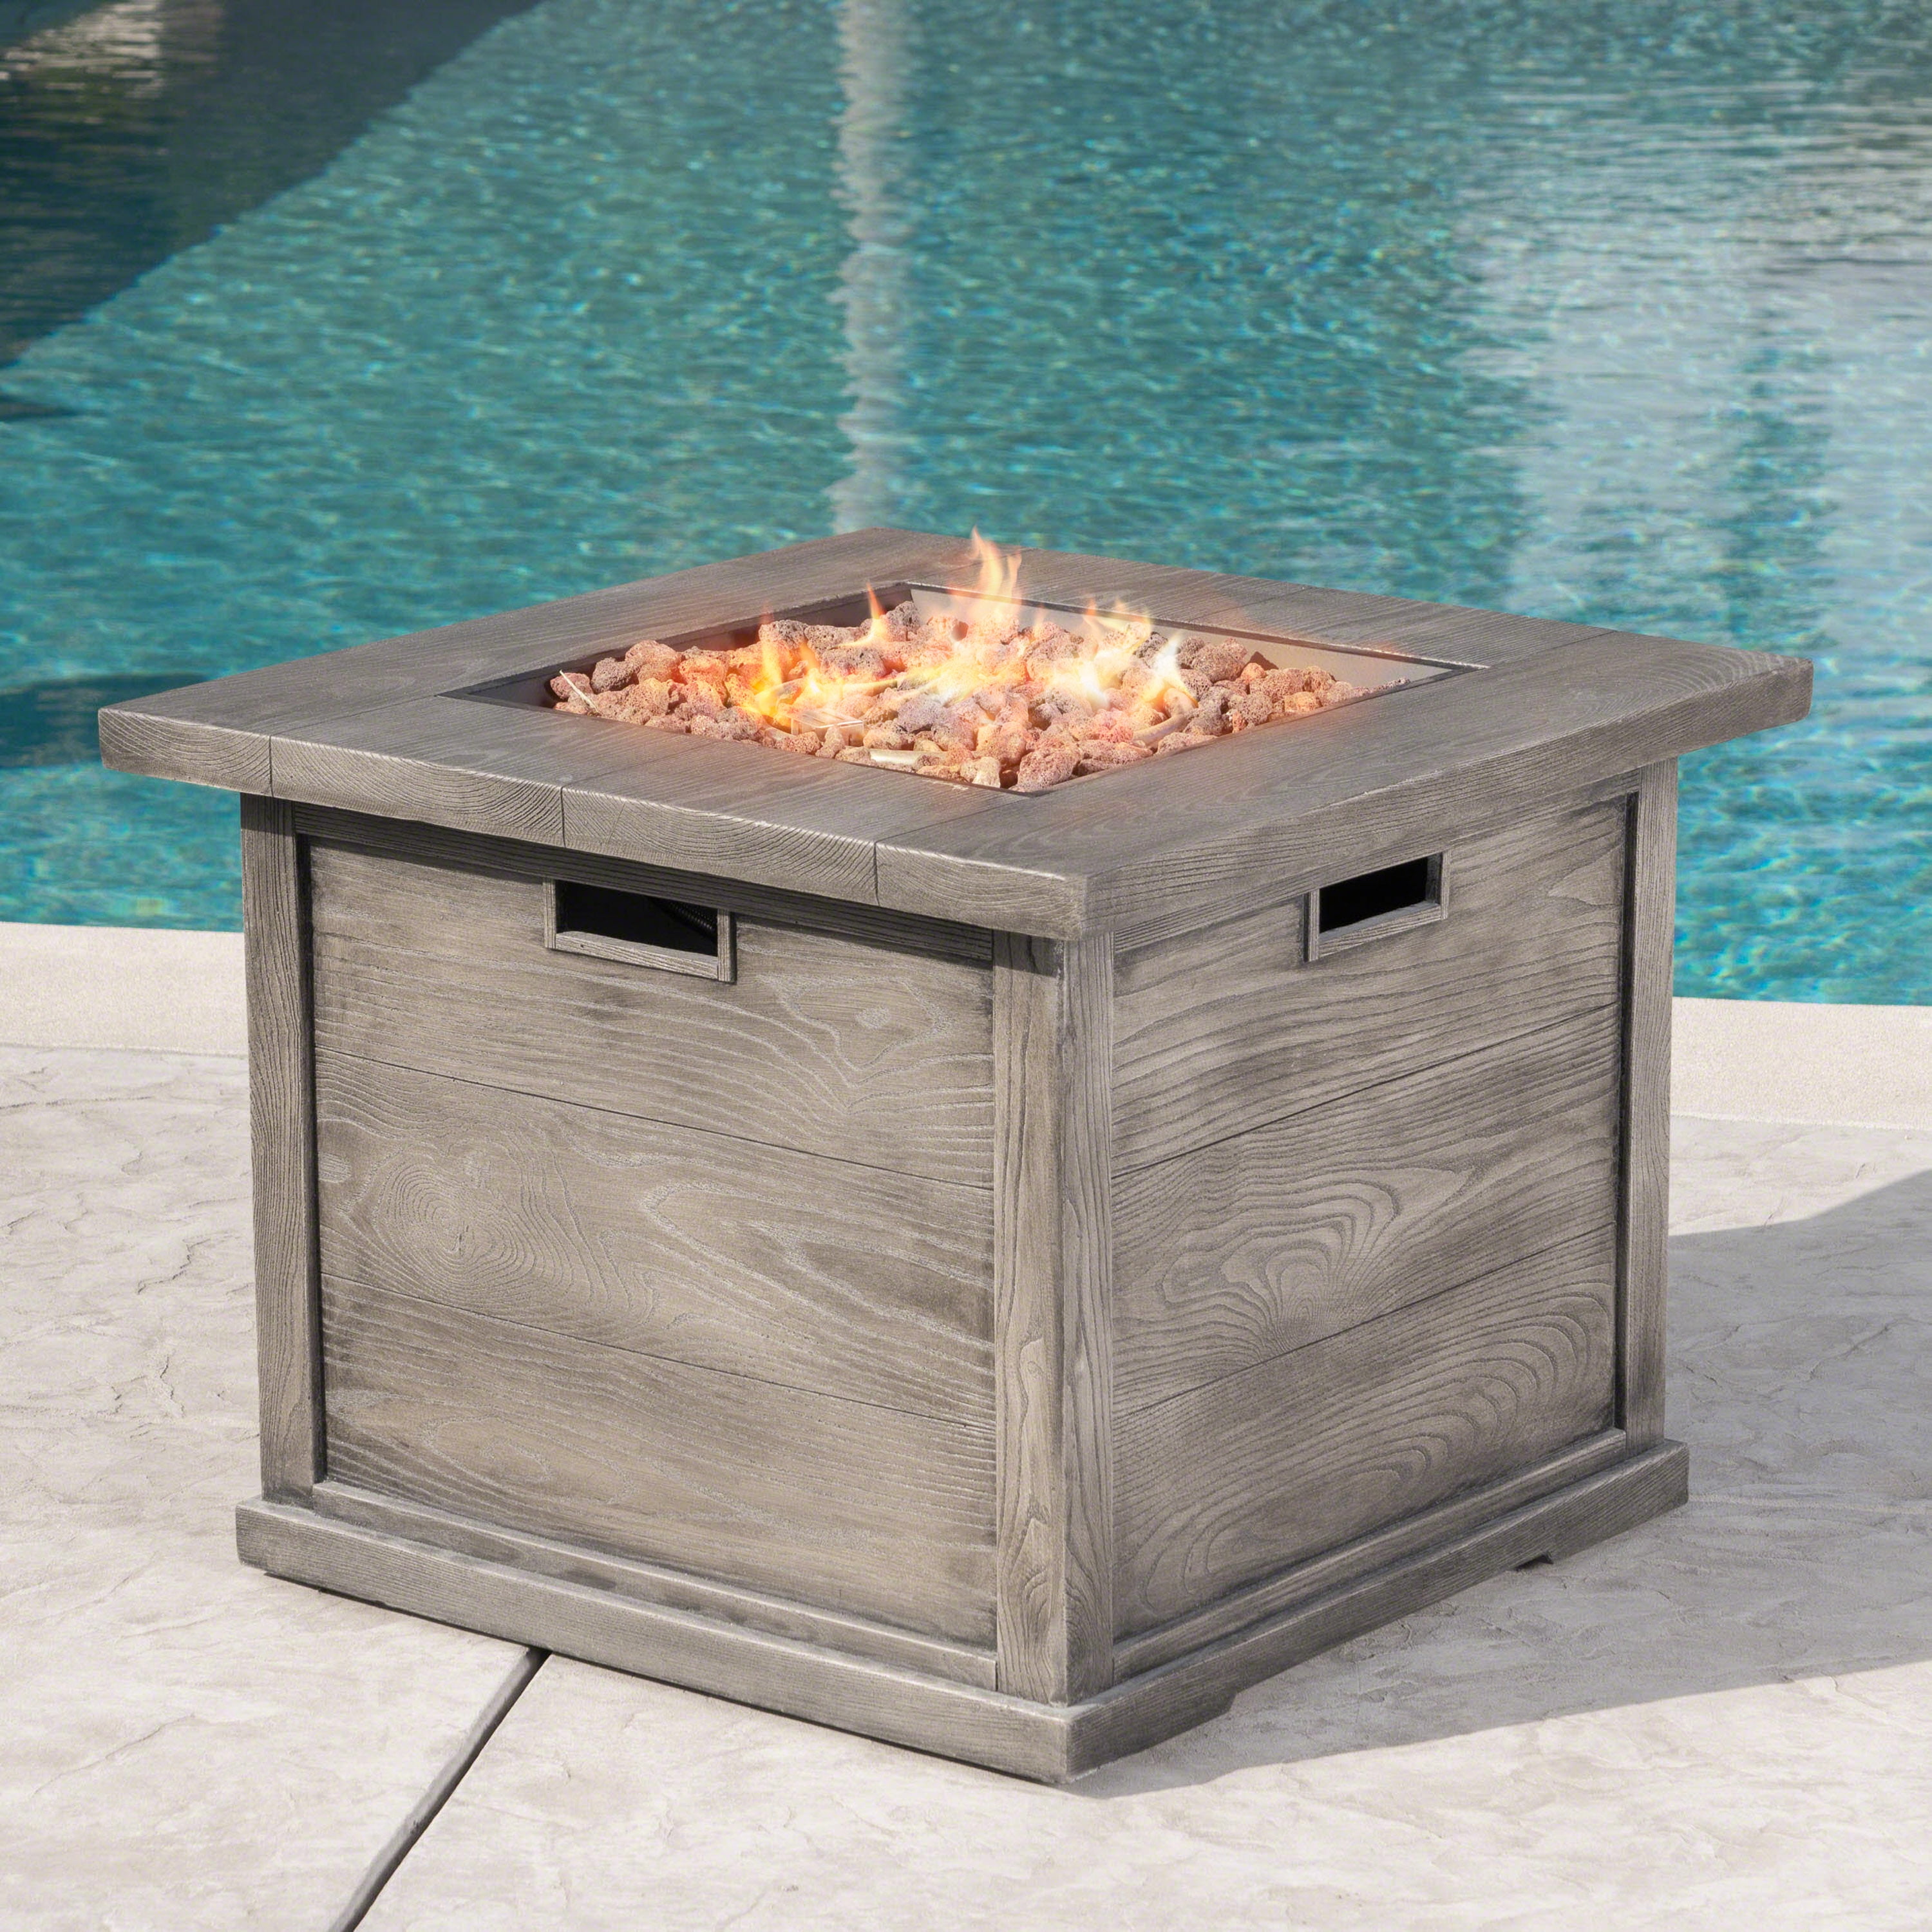 Colby Outdoor Wood Patterned Square Gas Fire Pit, Grey - Walmart.com